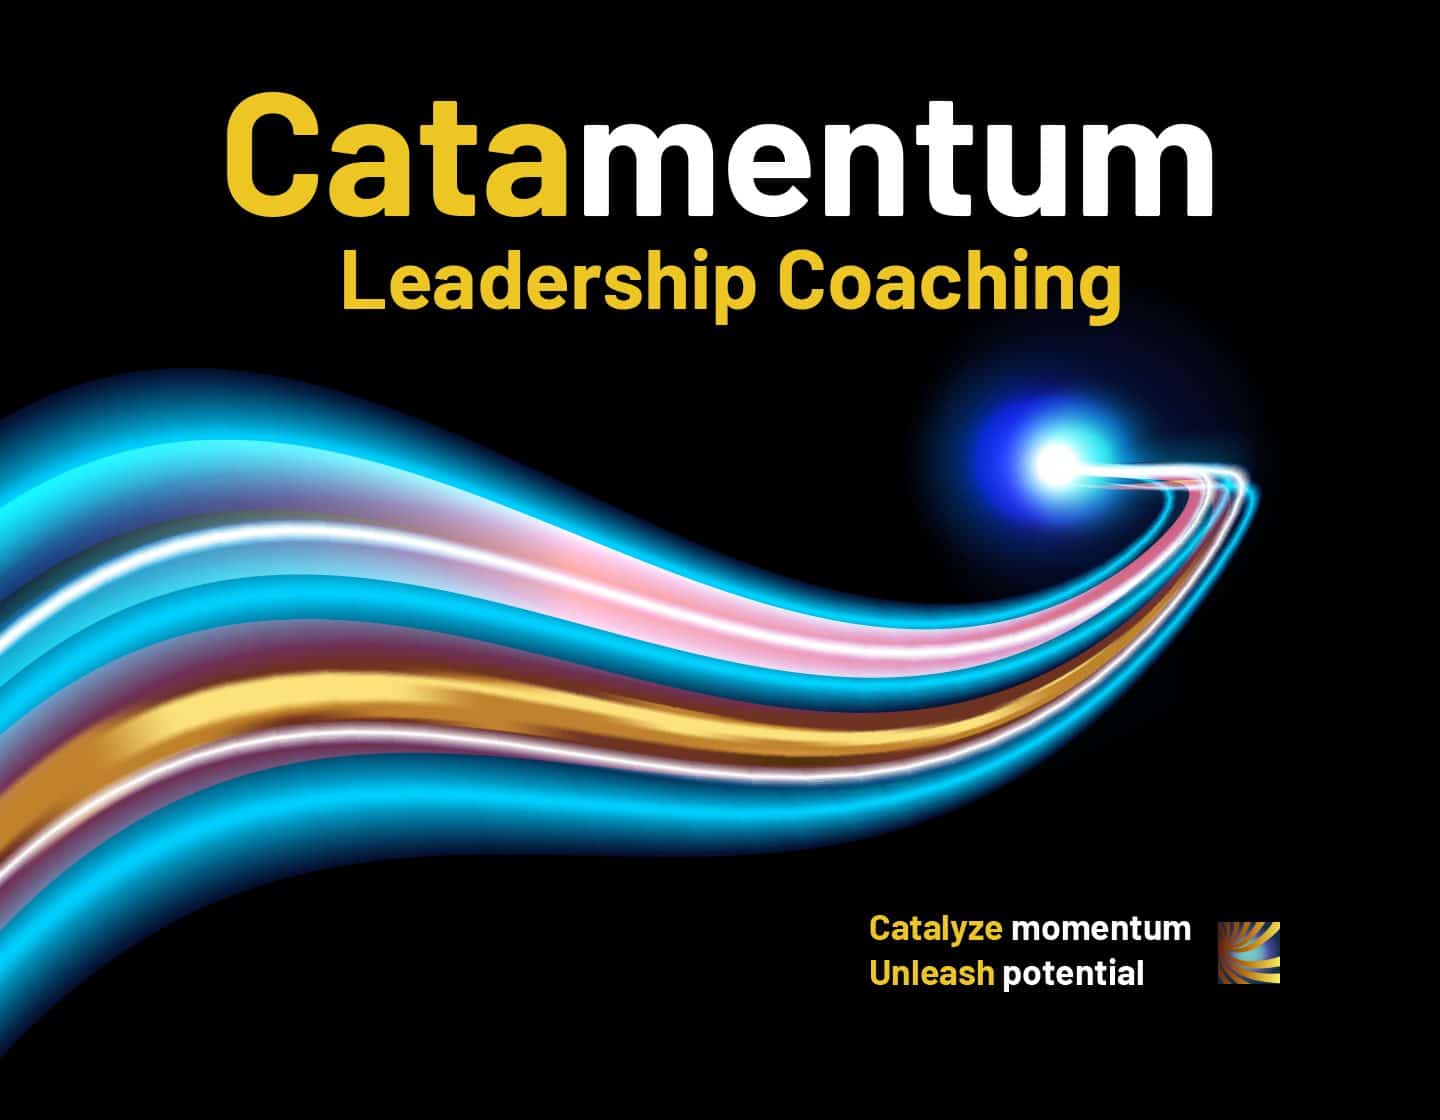 Announcing the launch of newly rebranded Catamentum Leadership Coaching, formerly known as The Practical Sage, LLC, for 1:1 individual leaders & team coaching.